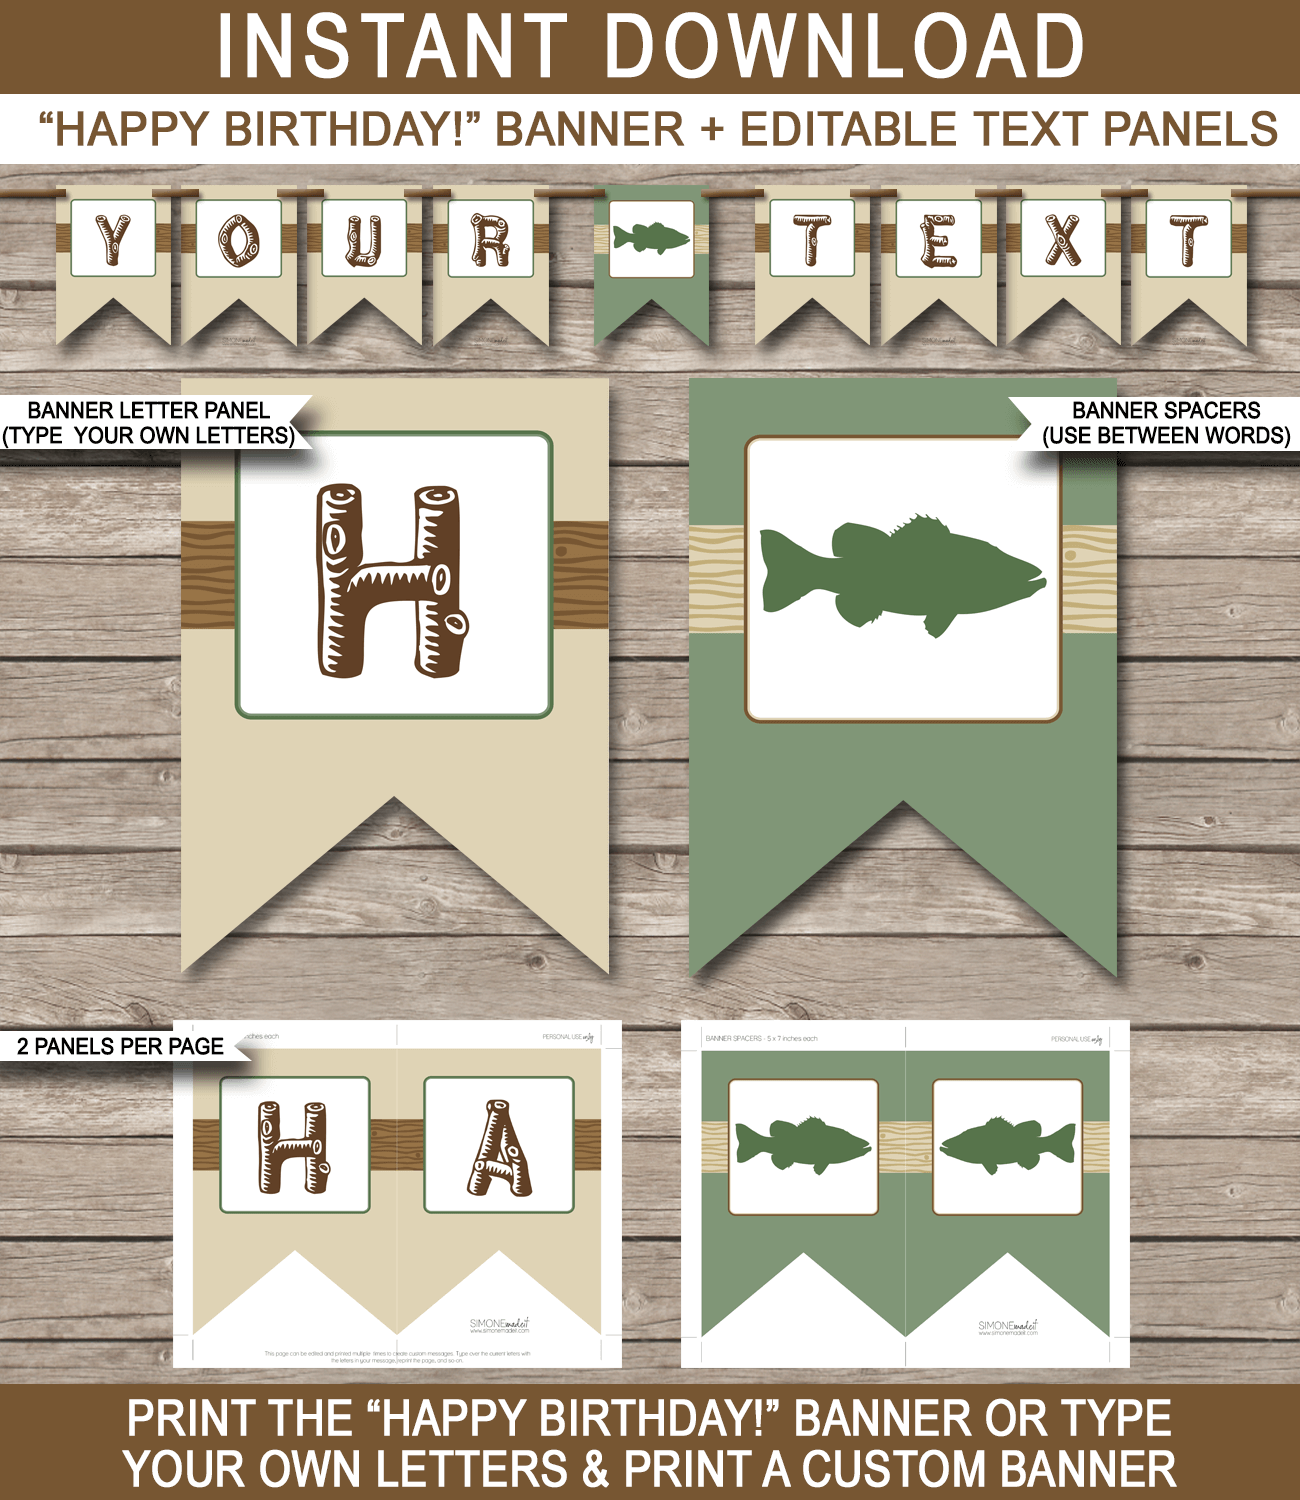 Fishing Party Banner Template - Fishing Bunting - Happy Birthday Banner - Birthday Party - Editable and Printable DIY Template - INSTANT DOWNLOAD $4.50 via simonemadeit.com